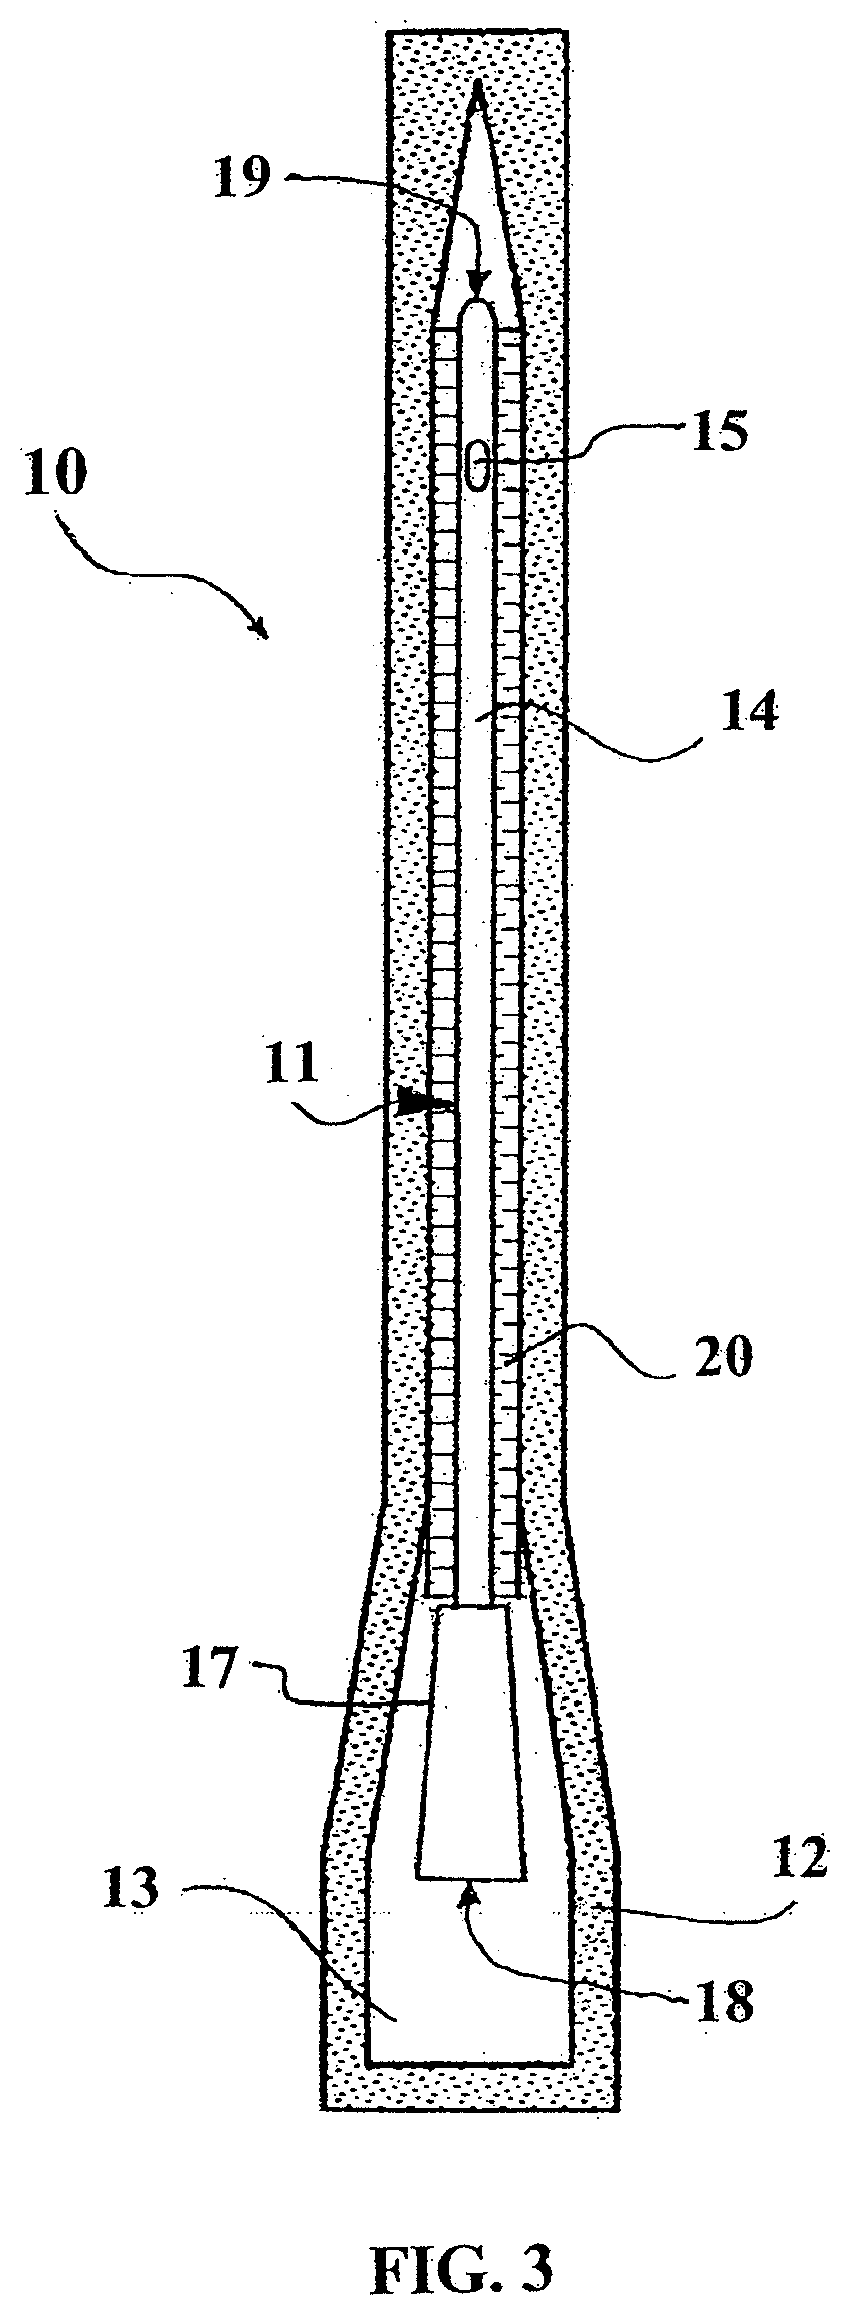 Catheter assembly/package utilizing a hydrating/hydrogel sleeve and method of making and using the same